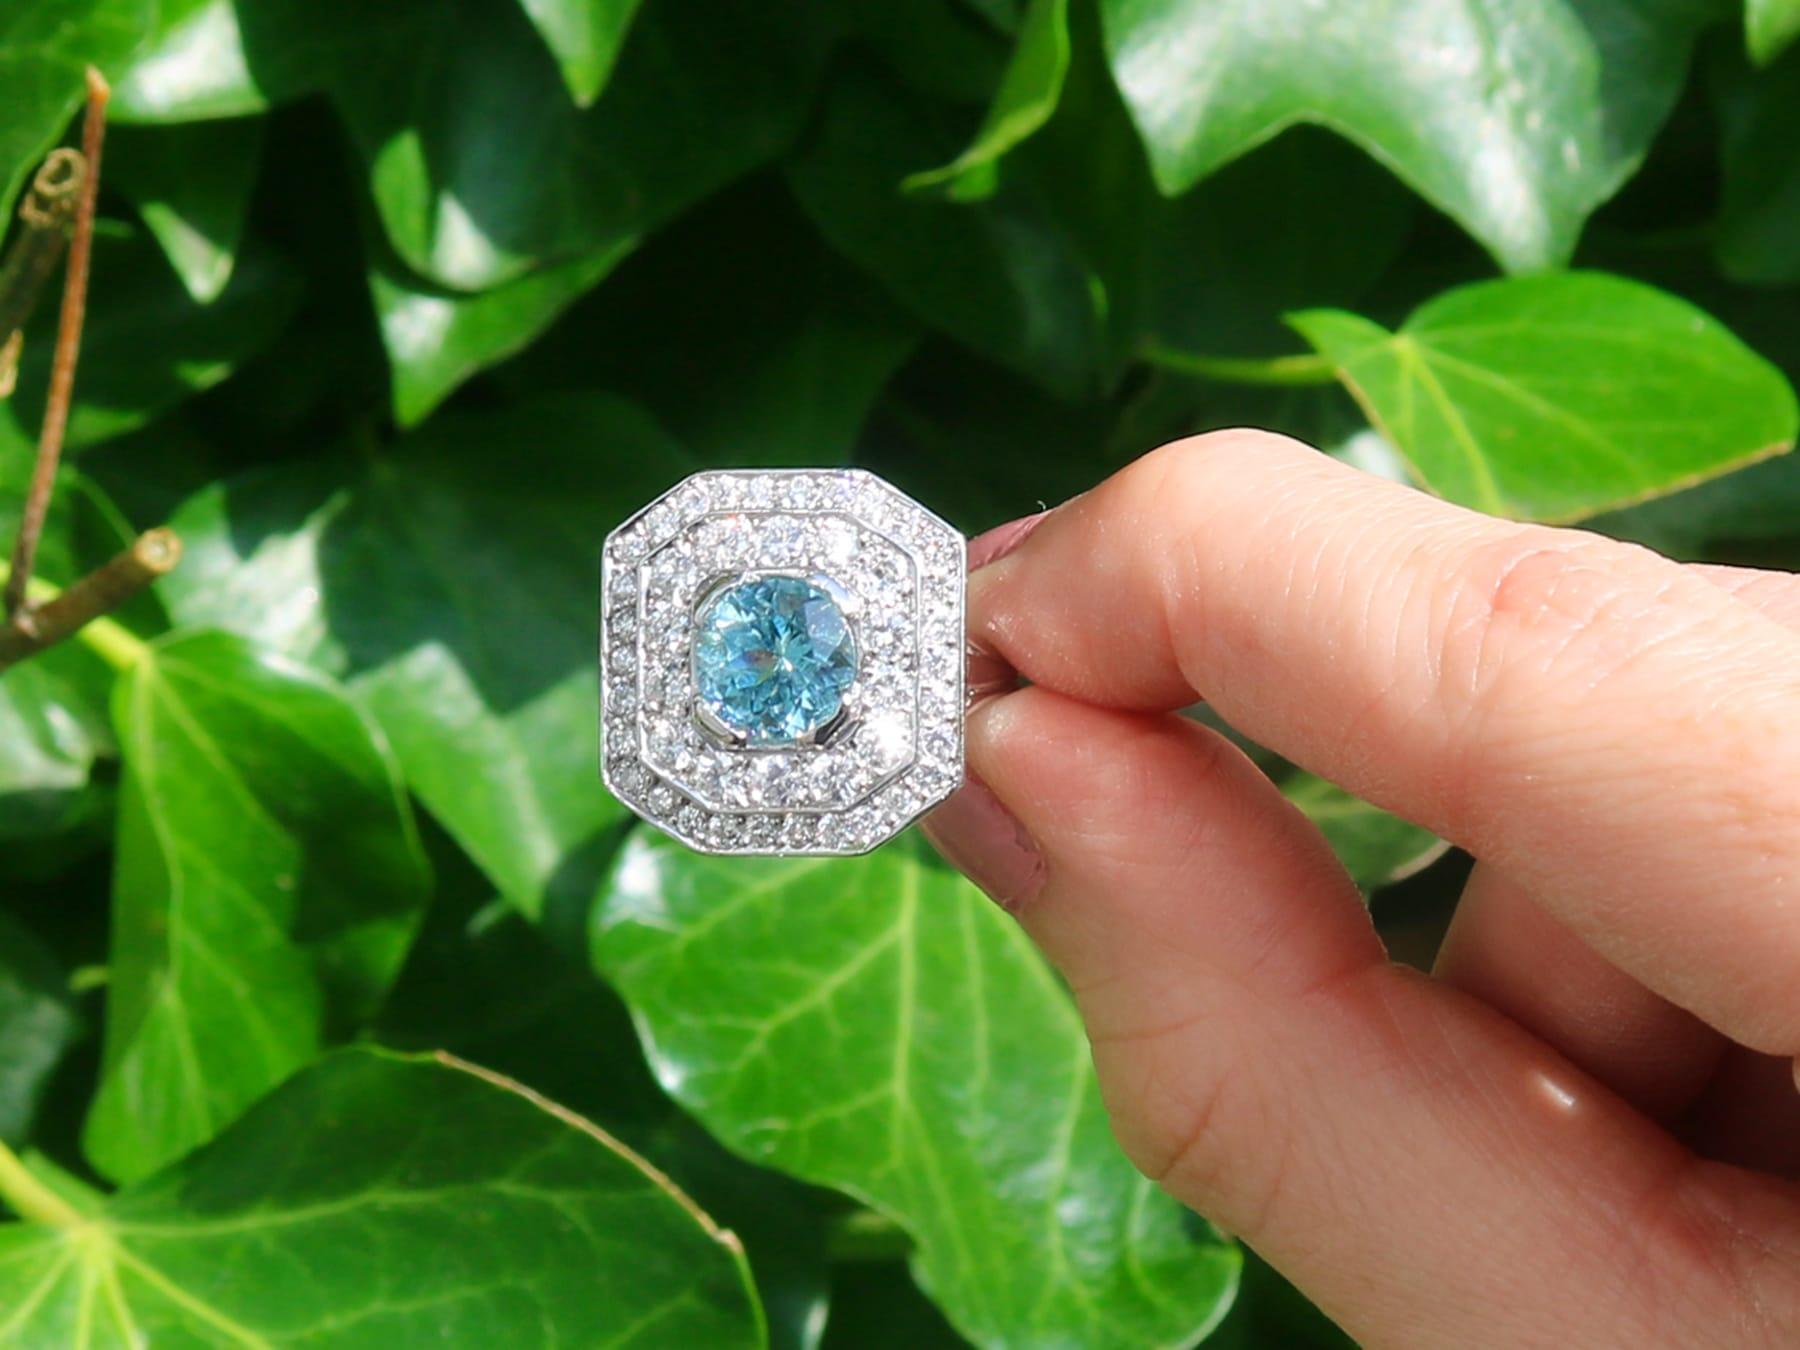 A fine and impressive vintage 2.11 carat aquamarine, 2.22 carat diamond and 18 karat white gold dress ring; part of our diverse antique jewelry and estate jewelry collections.

This stunning, fine and impressive vintage aquamarine ring has been